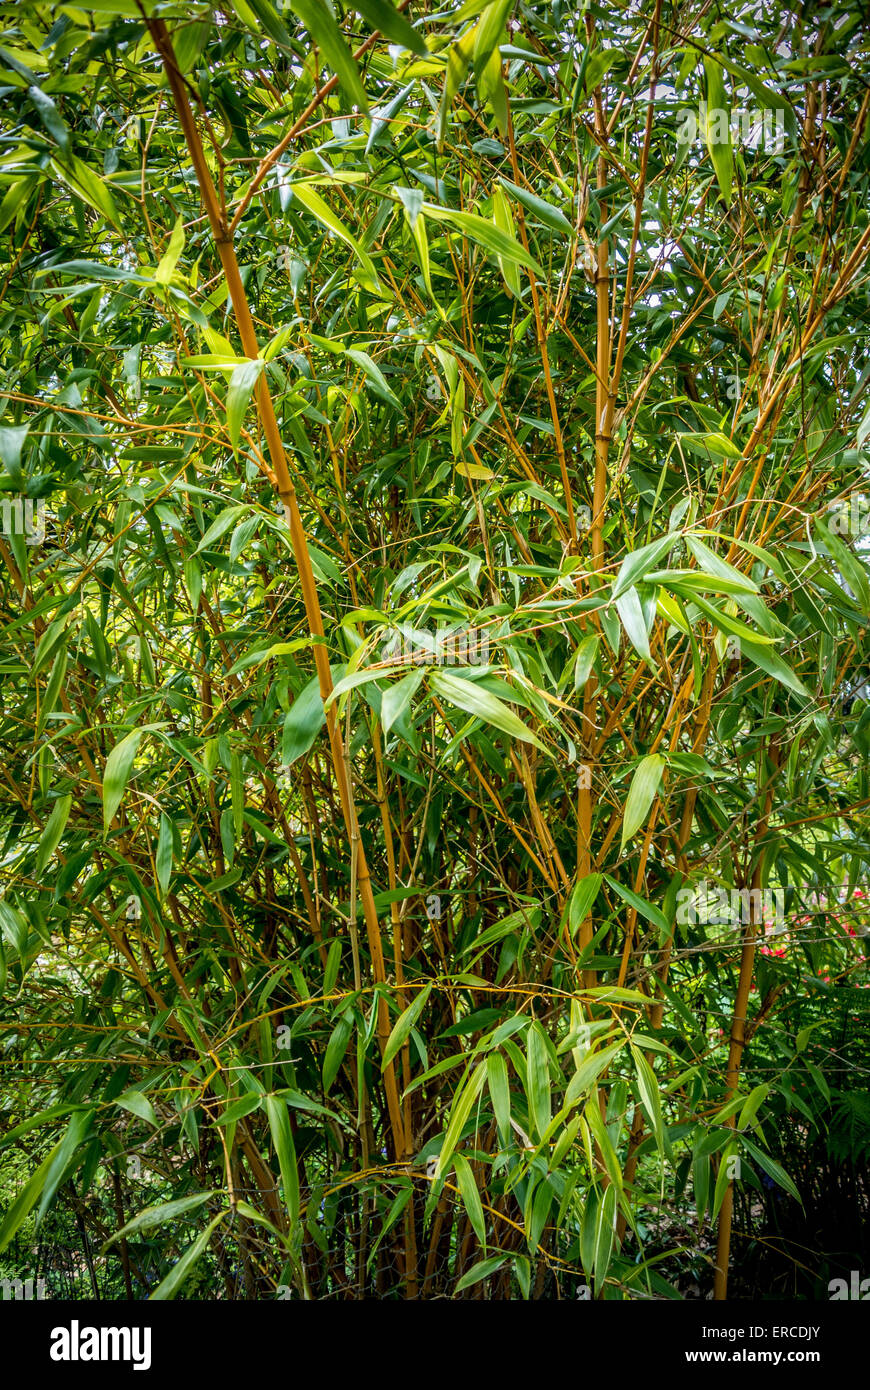 Bamboo plant growing in a UK garden Stock Photo